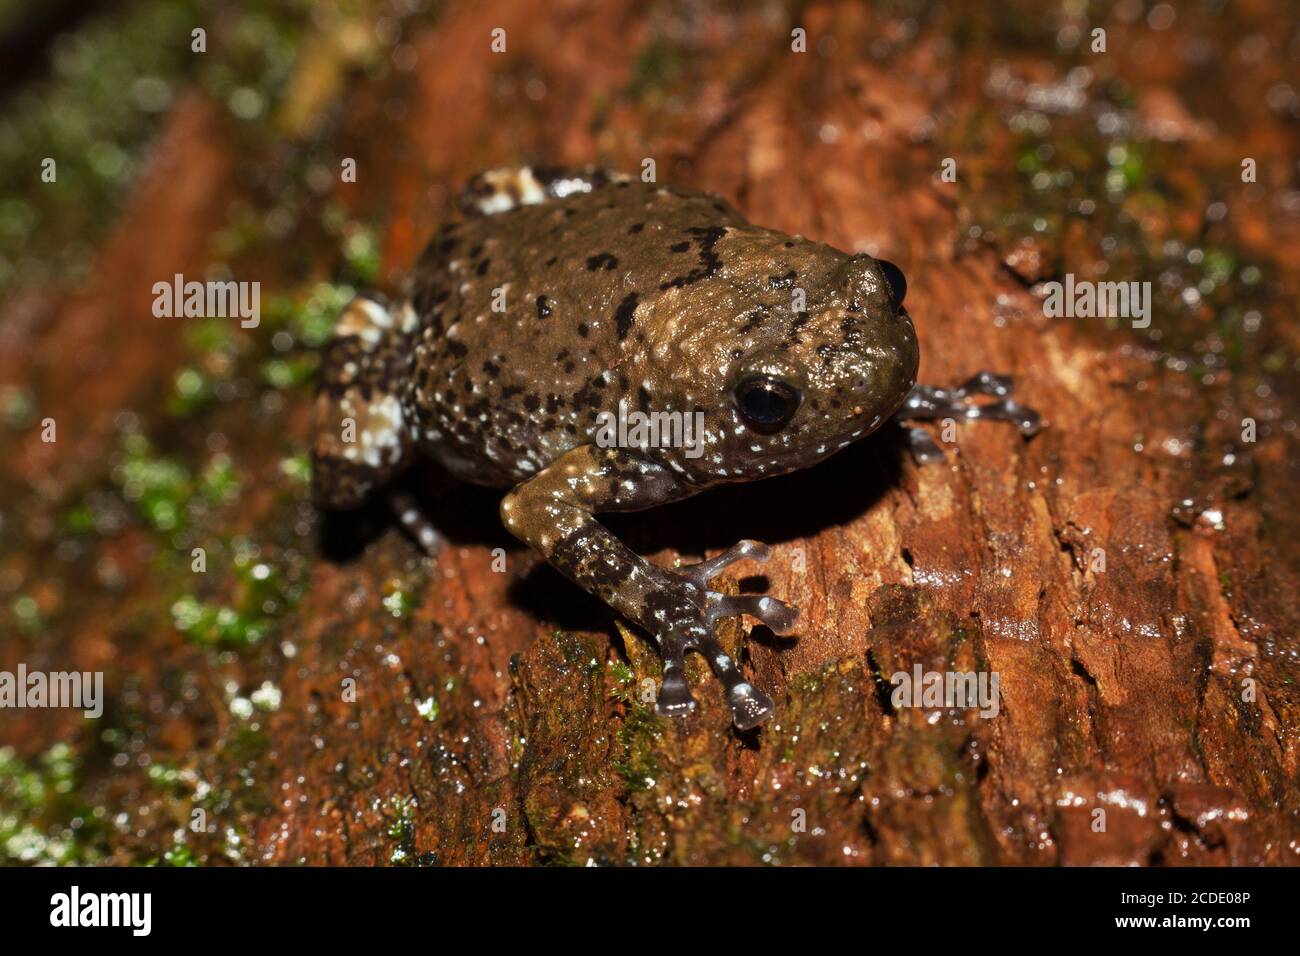 Ramanella mormorata, Indian dot frog, marbled ramanella is a species of narrow-mouthed frog endemic to the Western Ghats of southwestern India. Mather Stock Photo